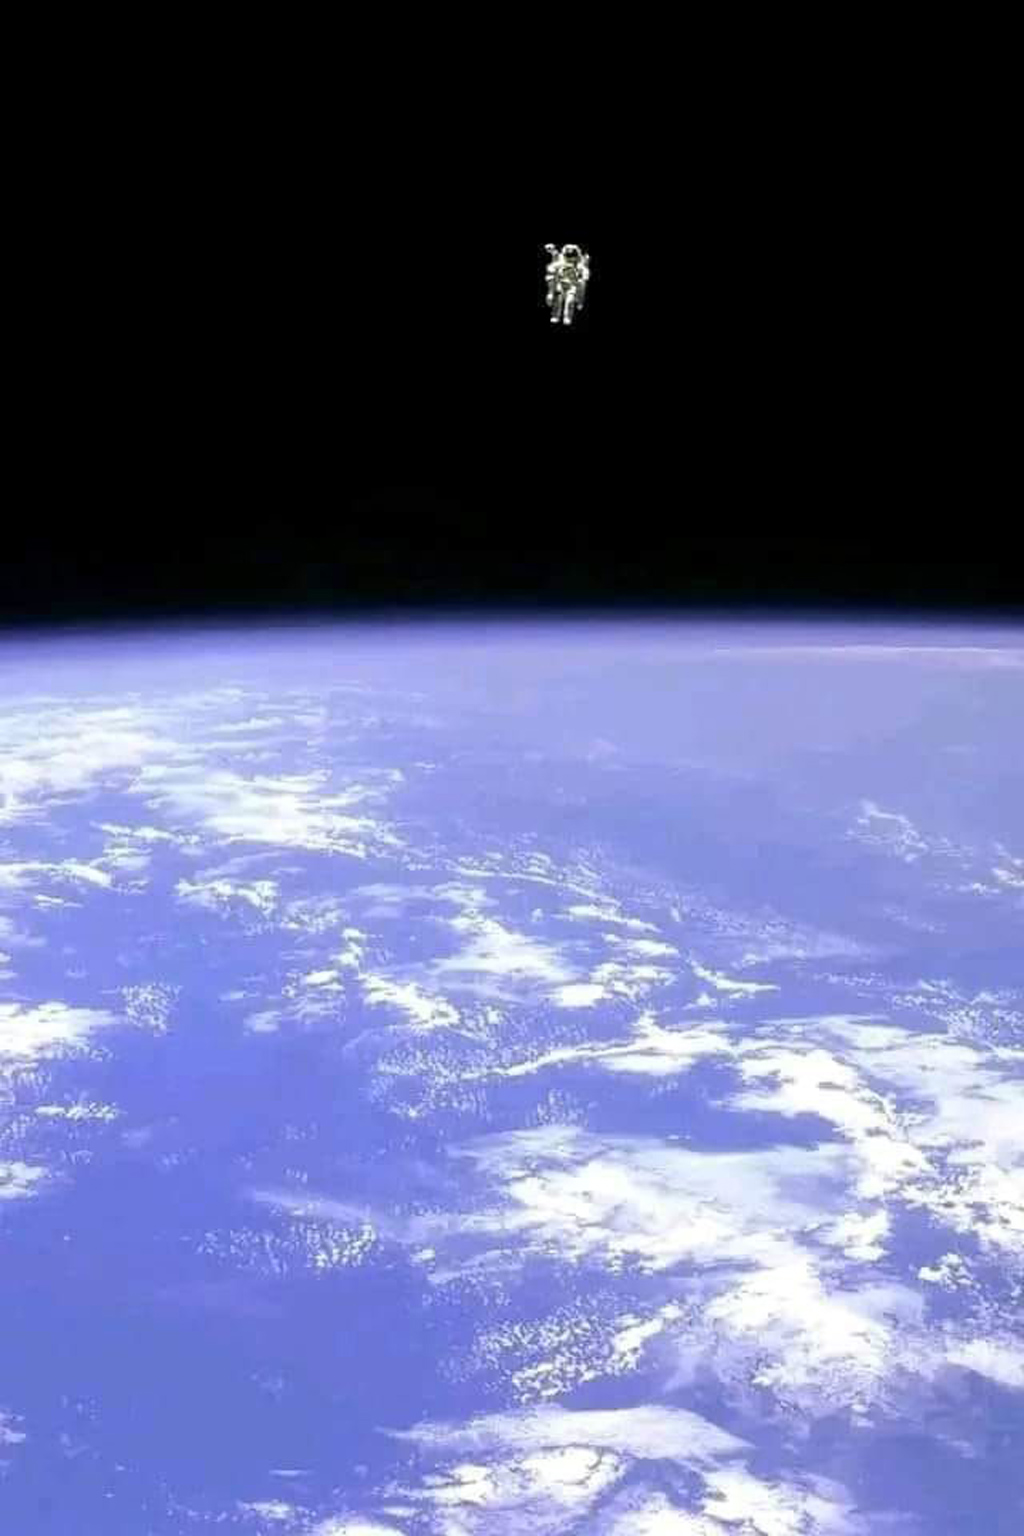 an image of the surface of Earth with an astronaut floating freely above the atmosphere